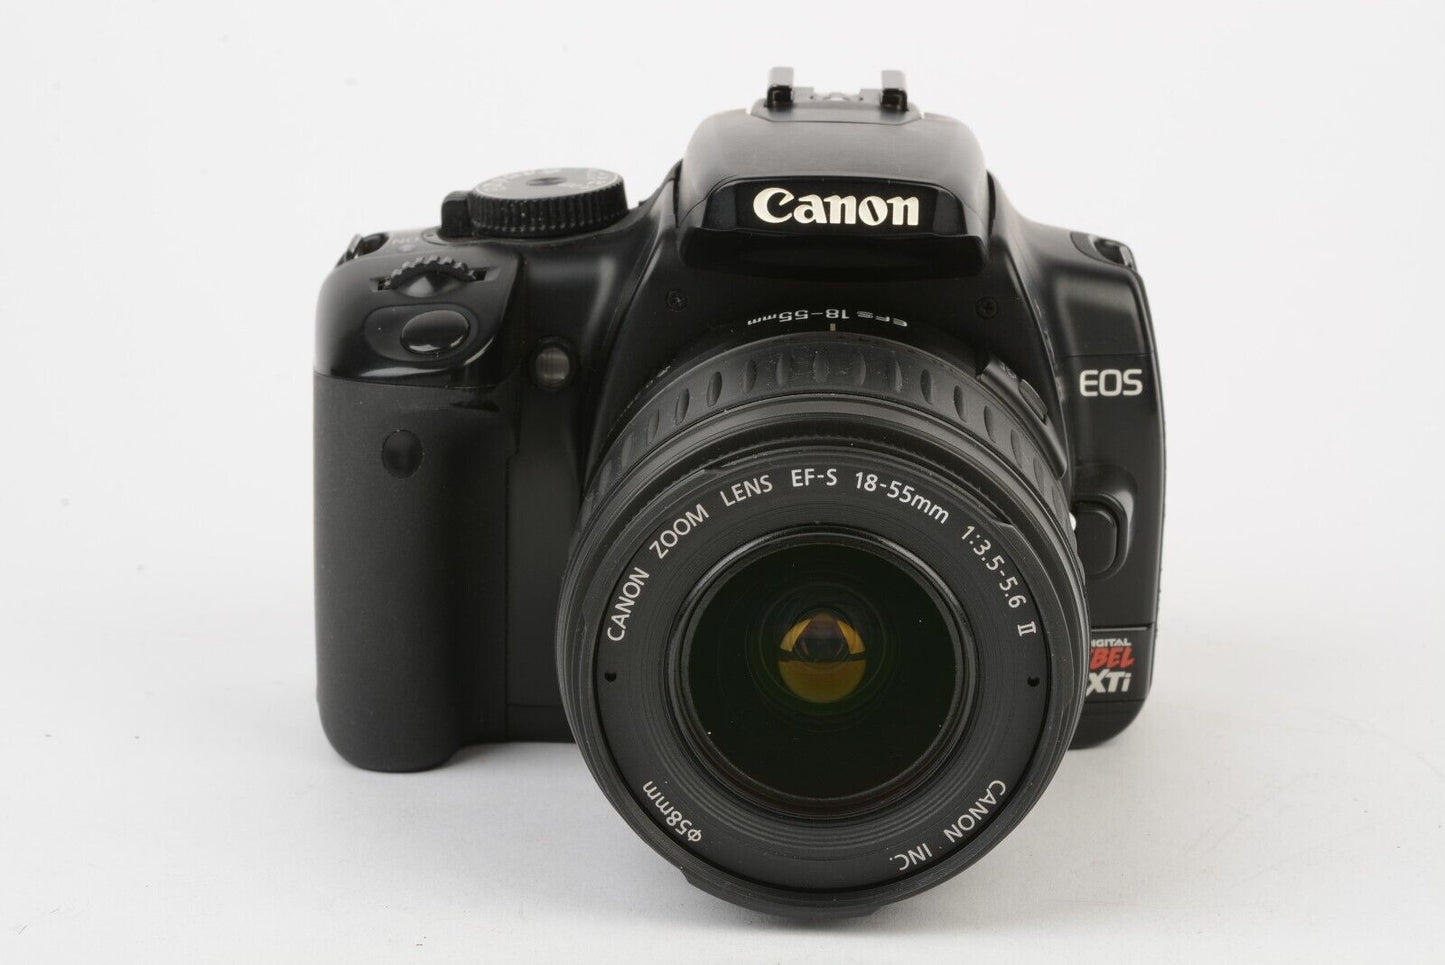 EXC++ CANON XTi DSLR BLACK BODY w/18-55mm ZOOM, 2BATTS+CHARGER+STRAP+MANUAL+BOOK